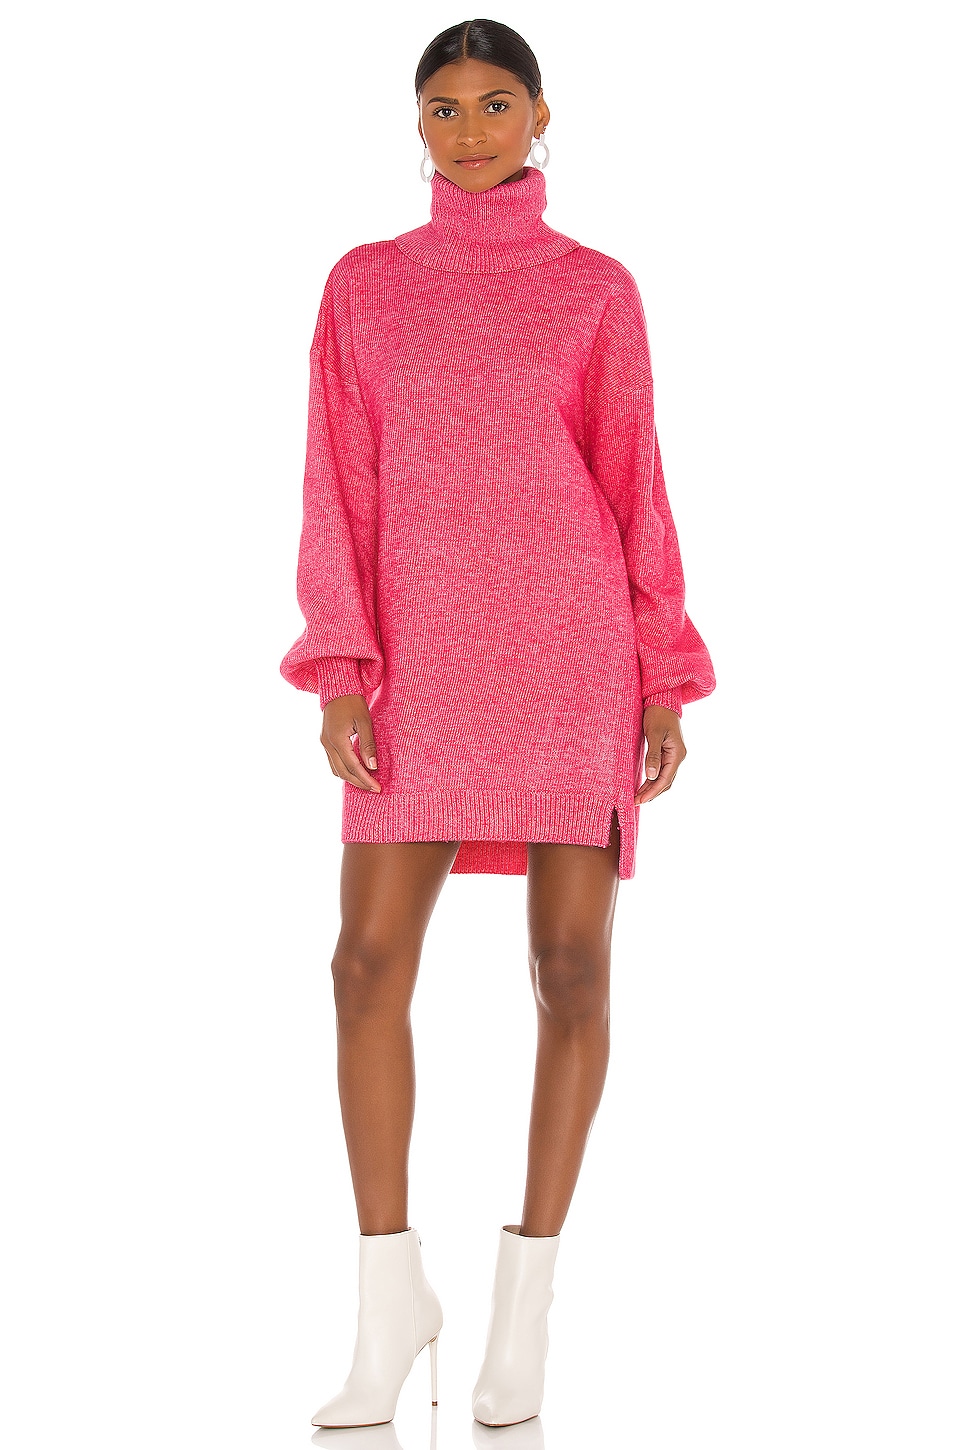 Show Me Your Mumu Chester Sweater Dress in Hot Pink Knit | REVOLVE